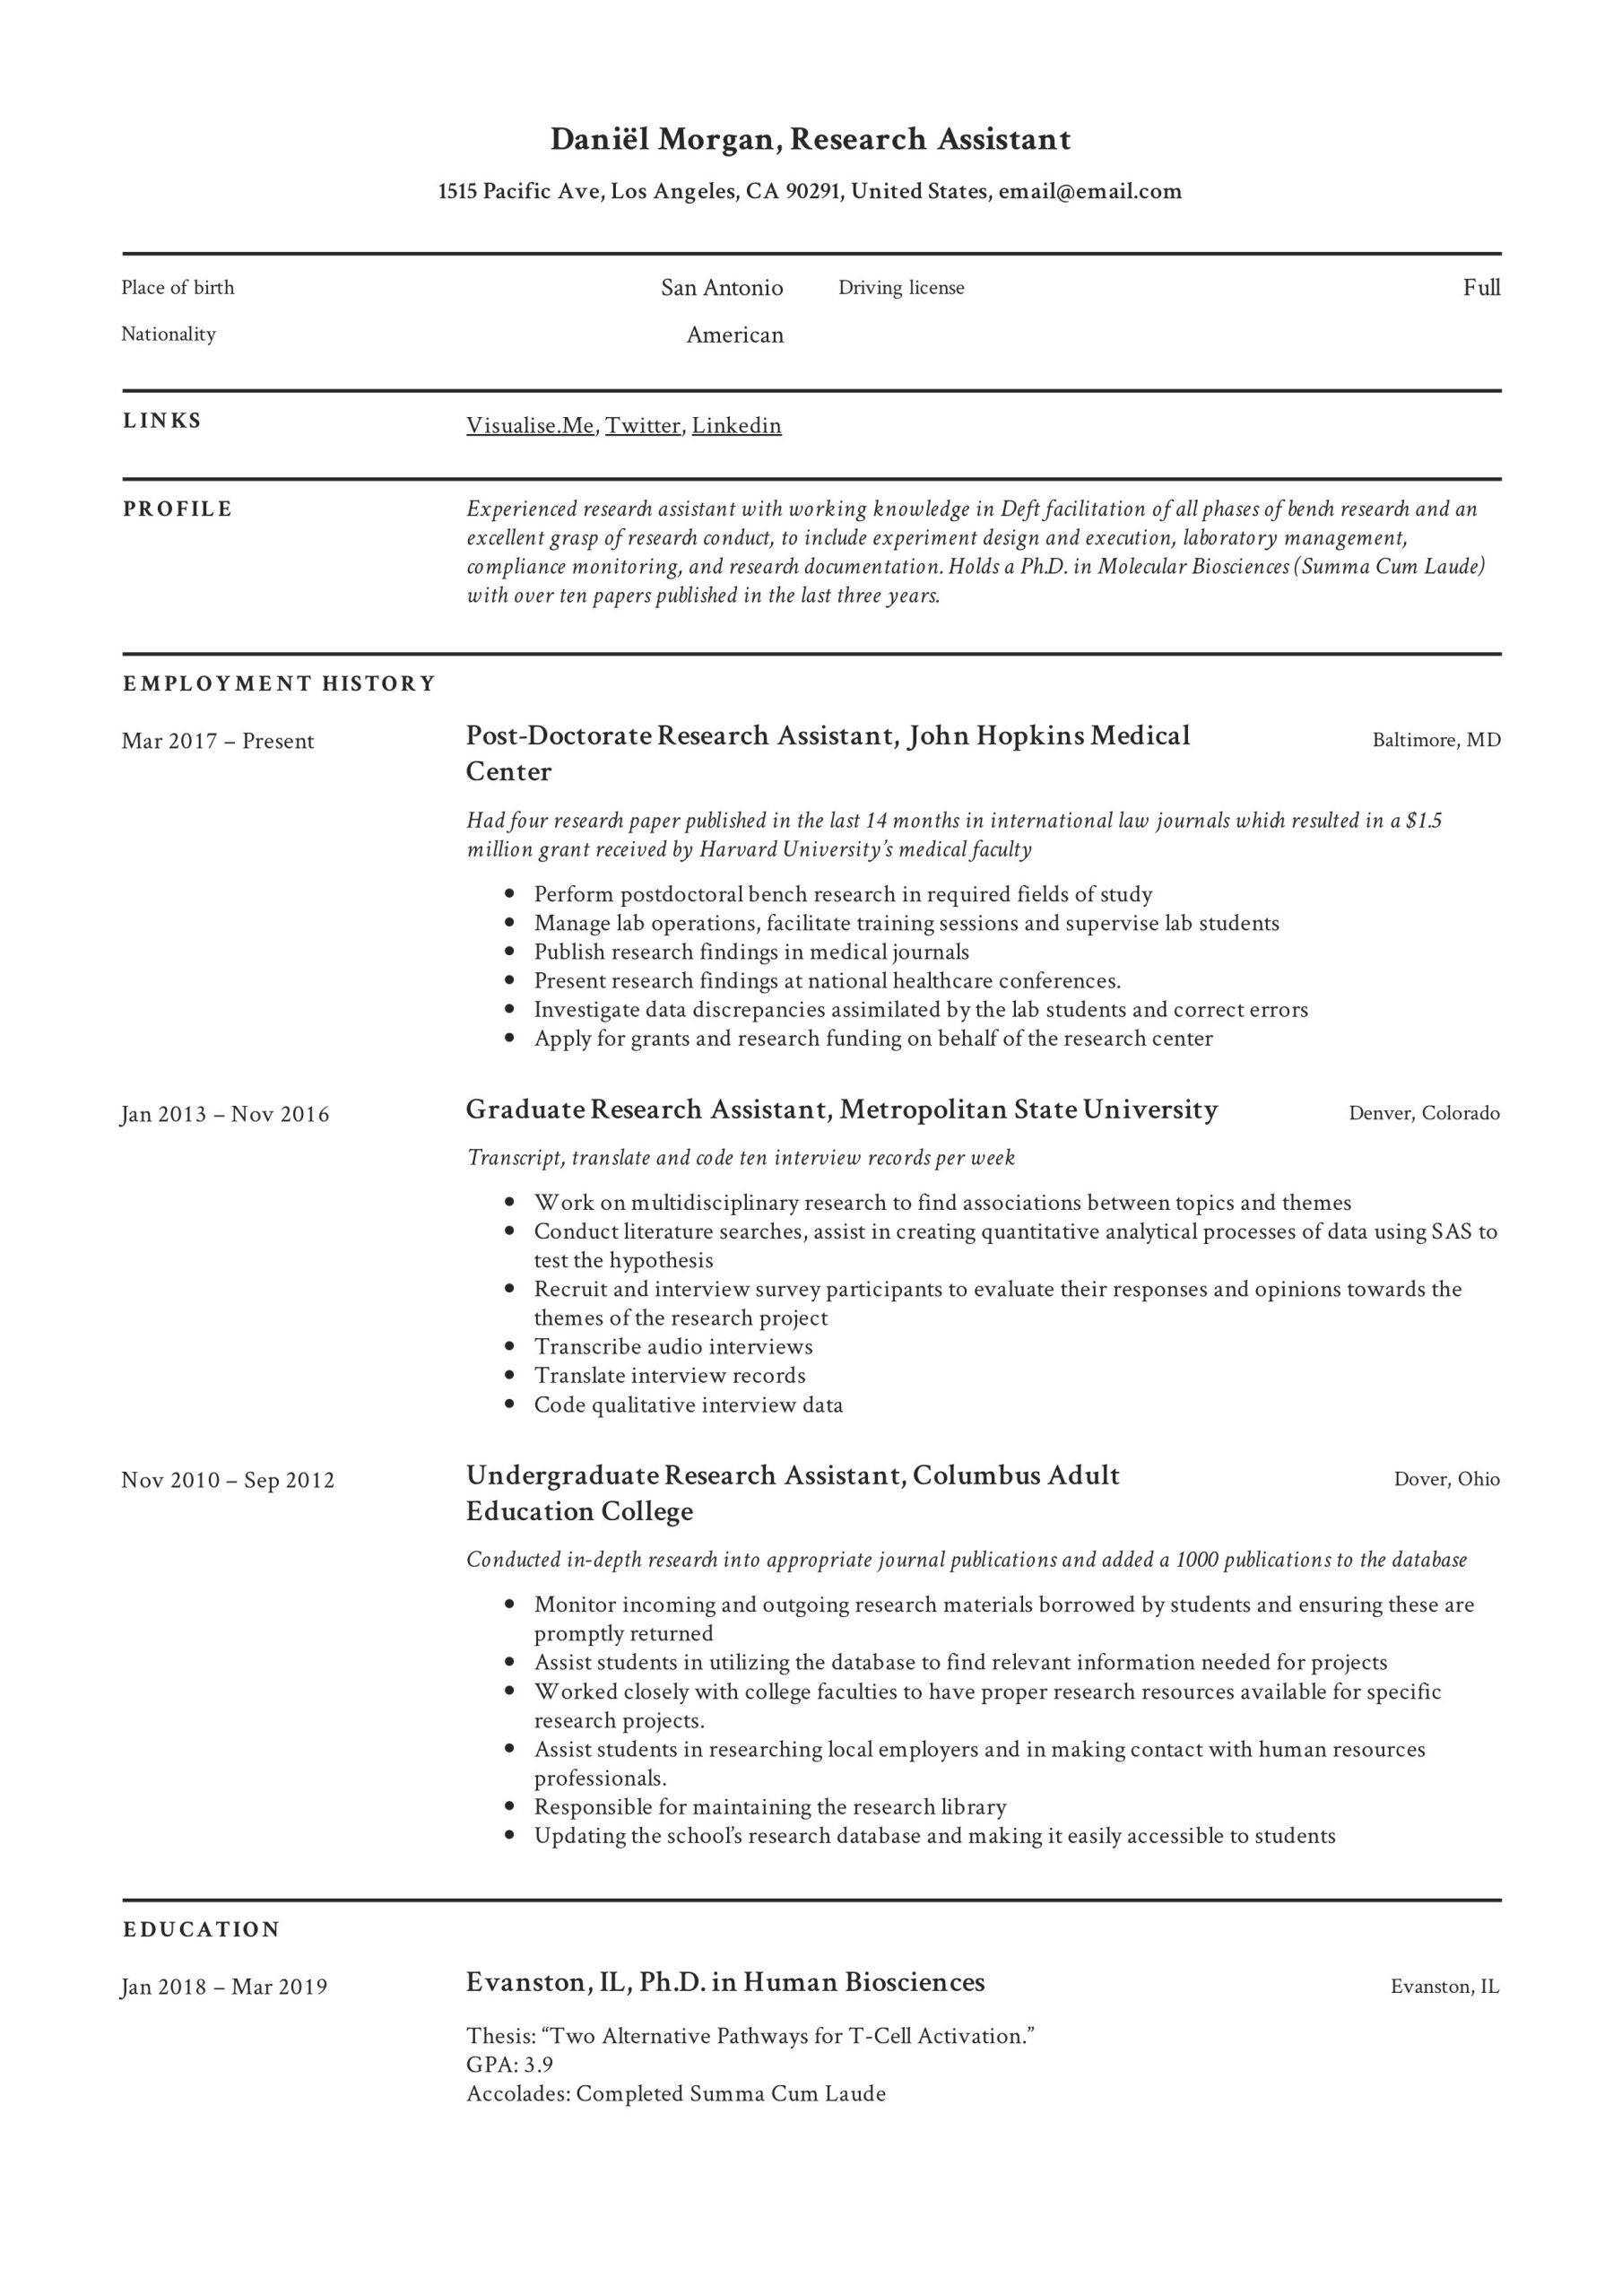 Sample Resume for Entry Level Research assistant Research assistant Resume & Writing Guide  12 Resume Examples